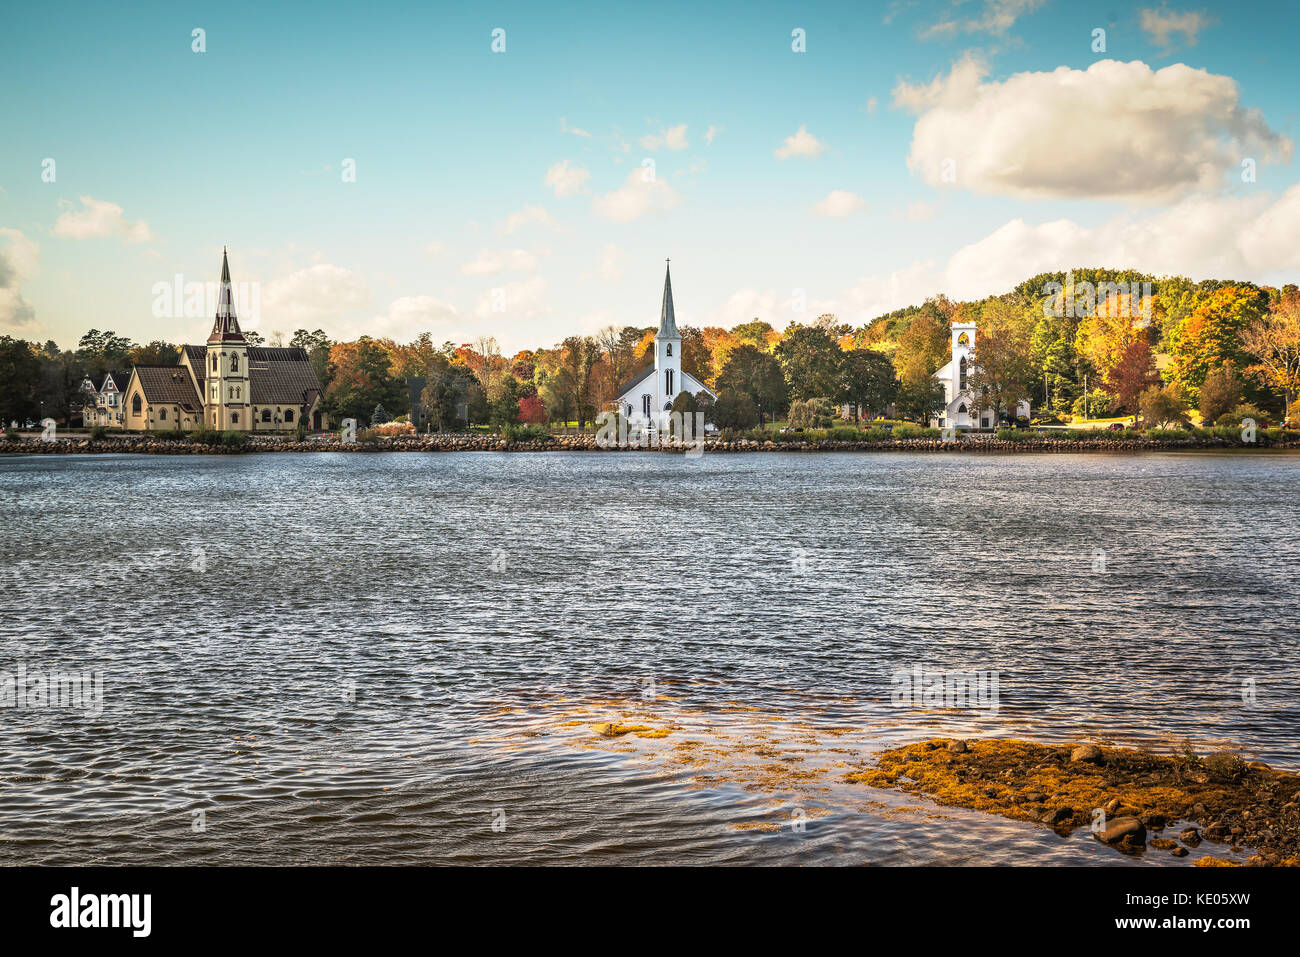 Shoreline view of the village of  Mahone Bay in Nova Scotia, Canada on a perfect Autumn day.  Three churches are visible on the banks of the inlet. Stock Photo